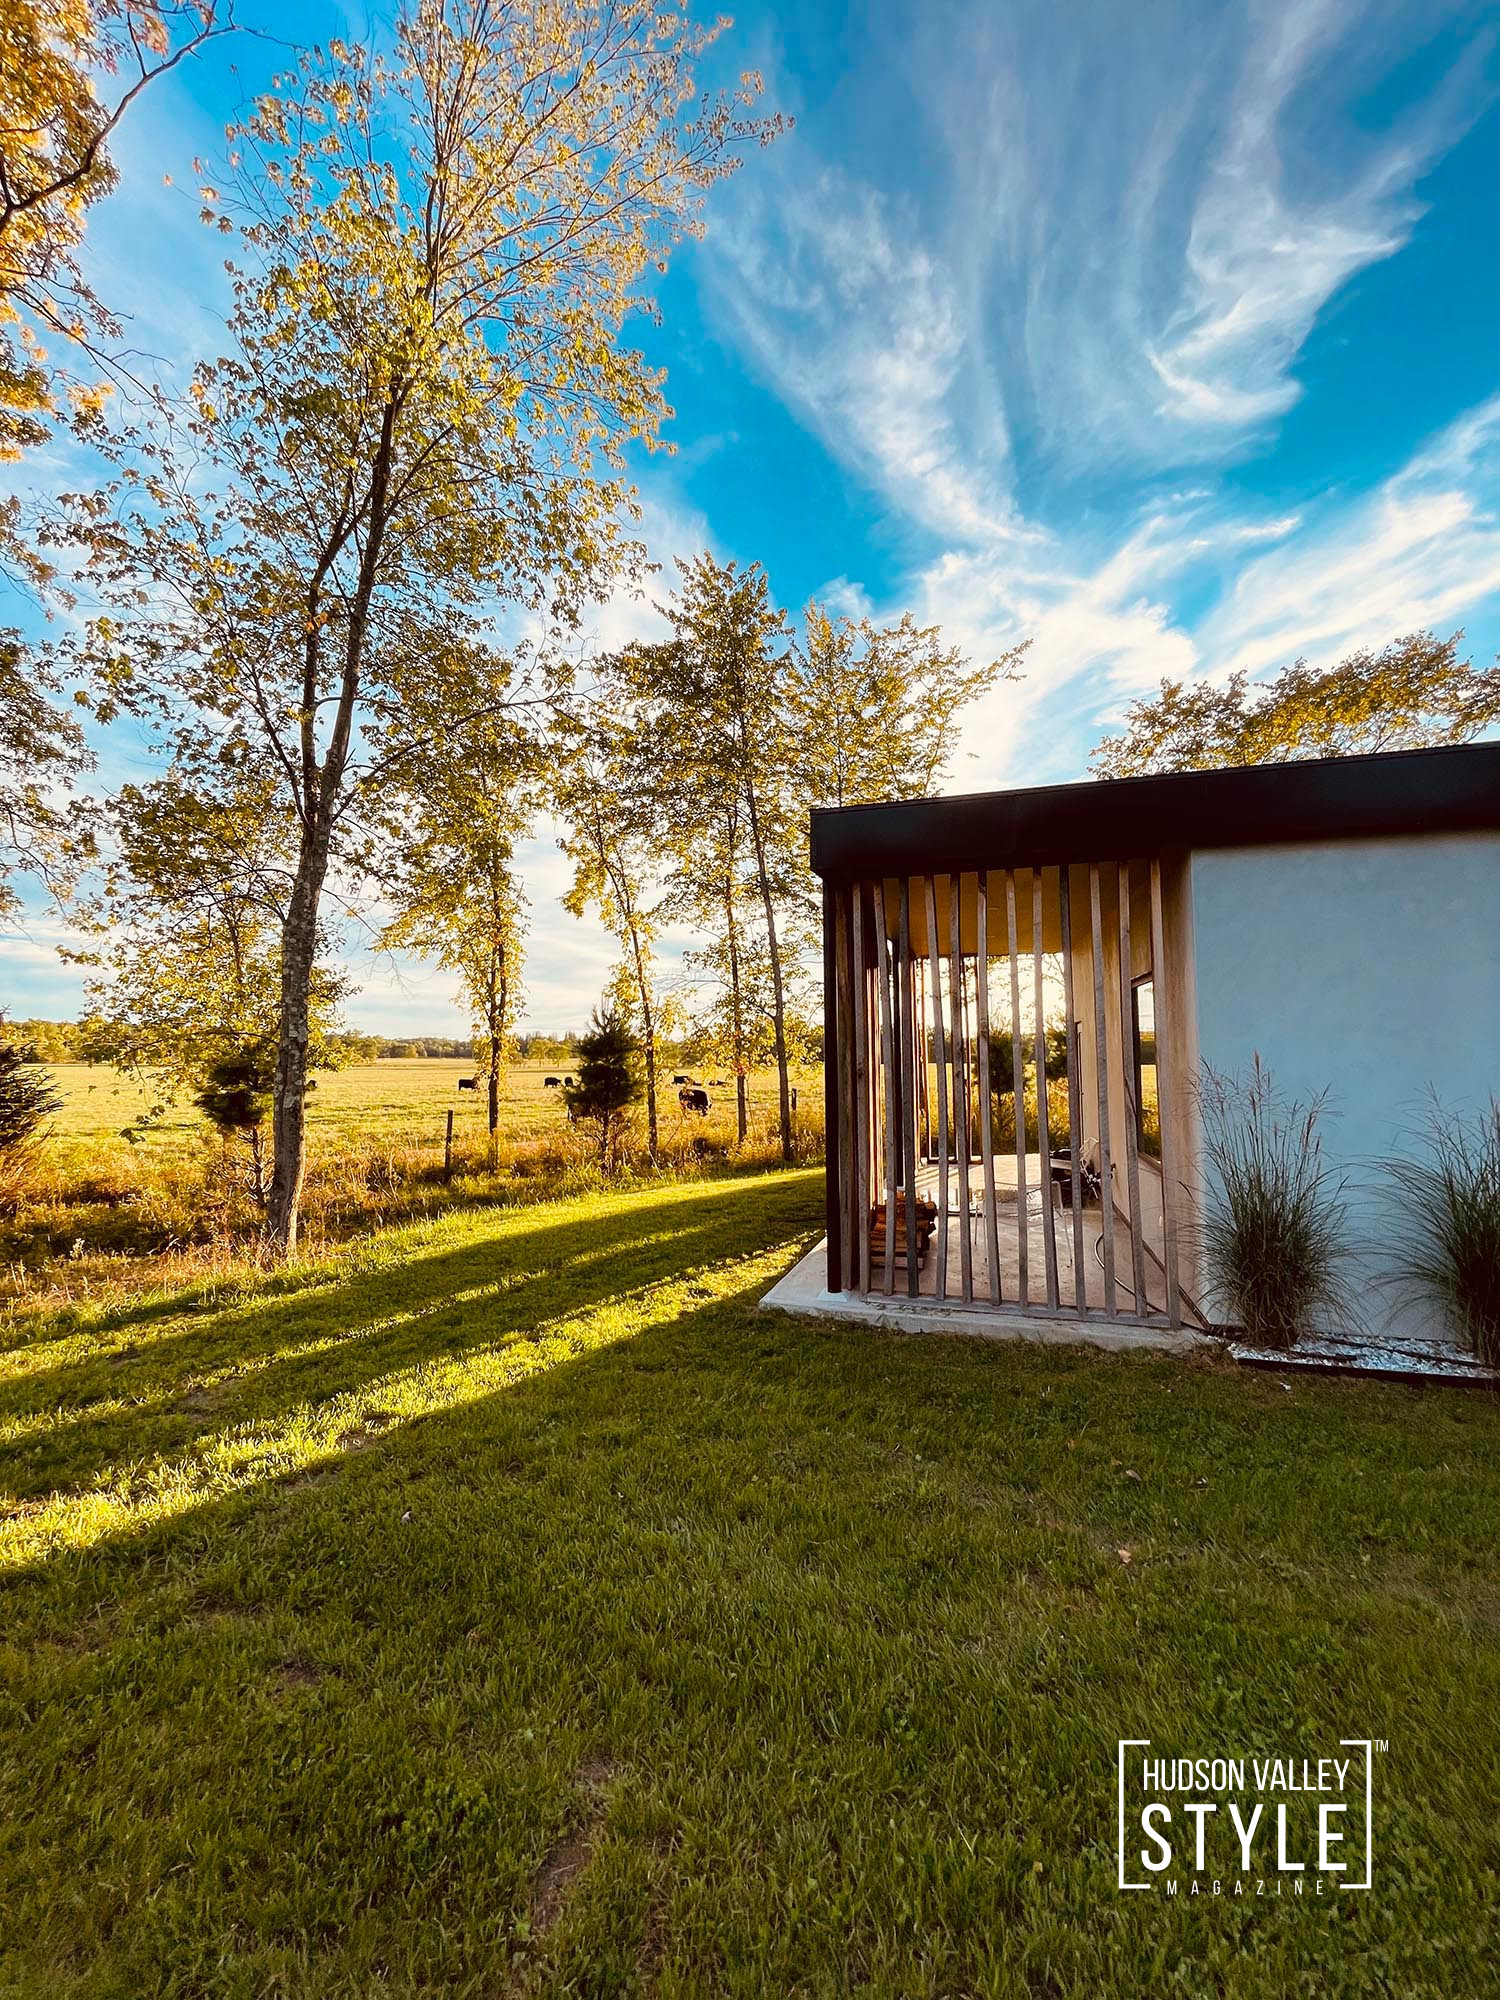 Book Your Stay at the Modern Villa in the Heart of Hudson Valley's Farmland – The Ultimate Guide to Spotting Fall Foliage in the Hudson Valley – Presented by Alluvion Vacations– Photography by Maxwell Alexander / Alluvion Media